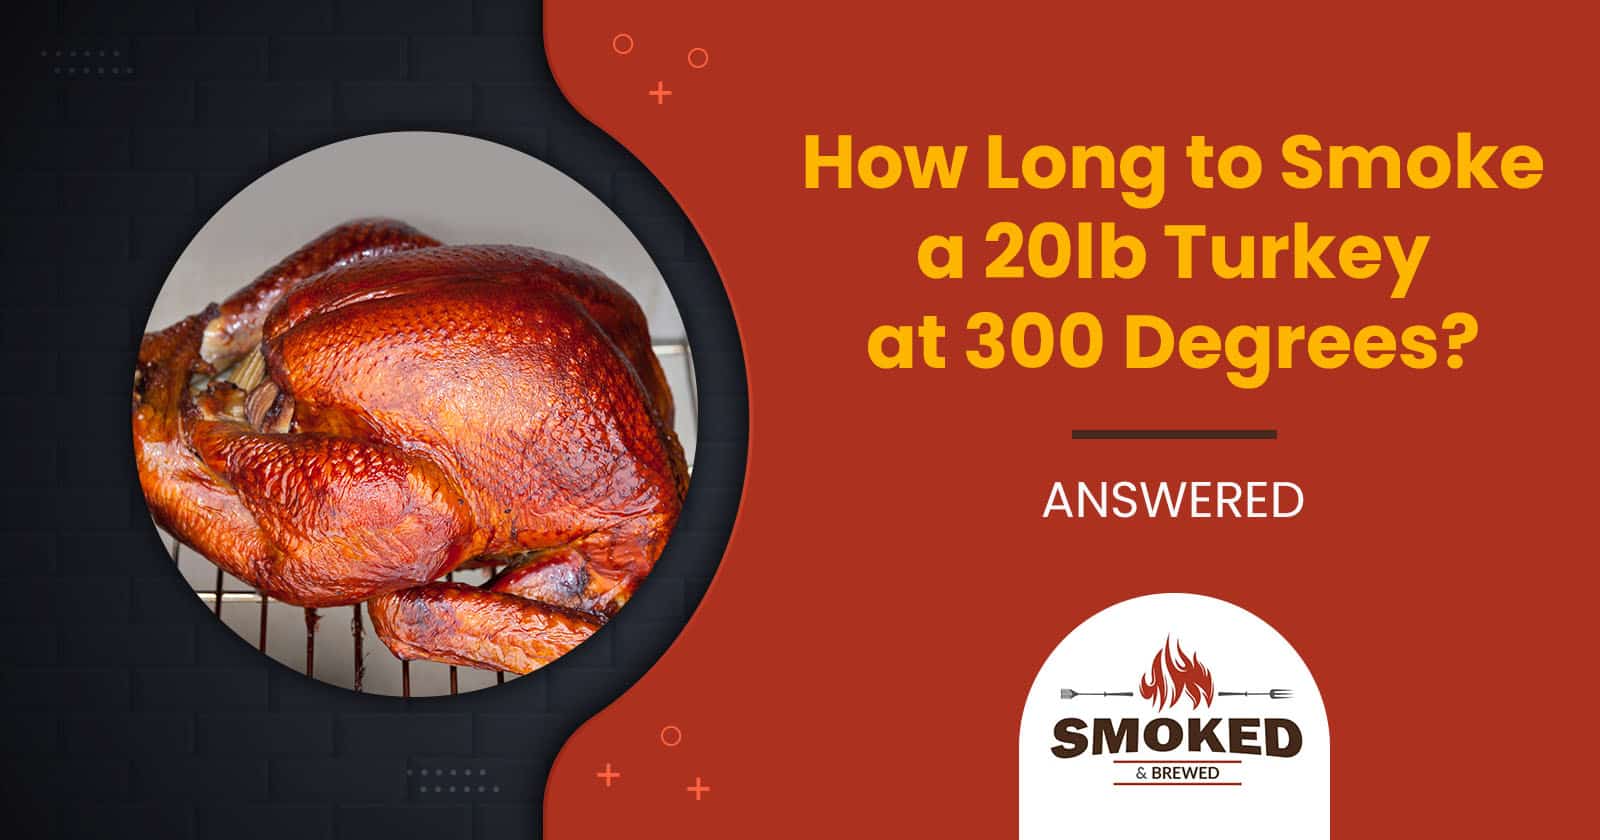 how long to smoke a lb turkey at degrees